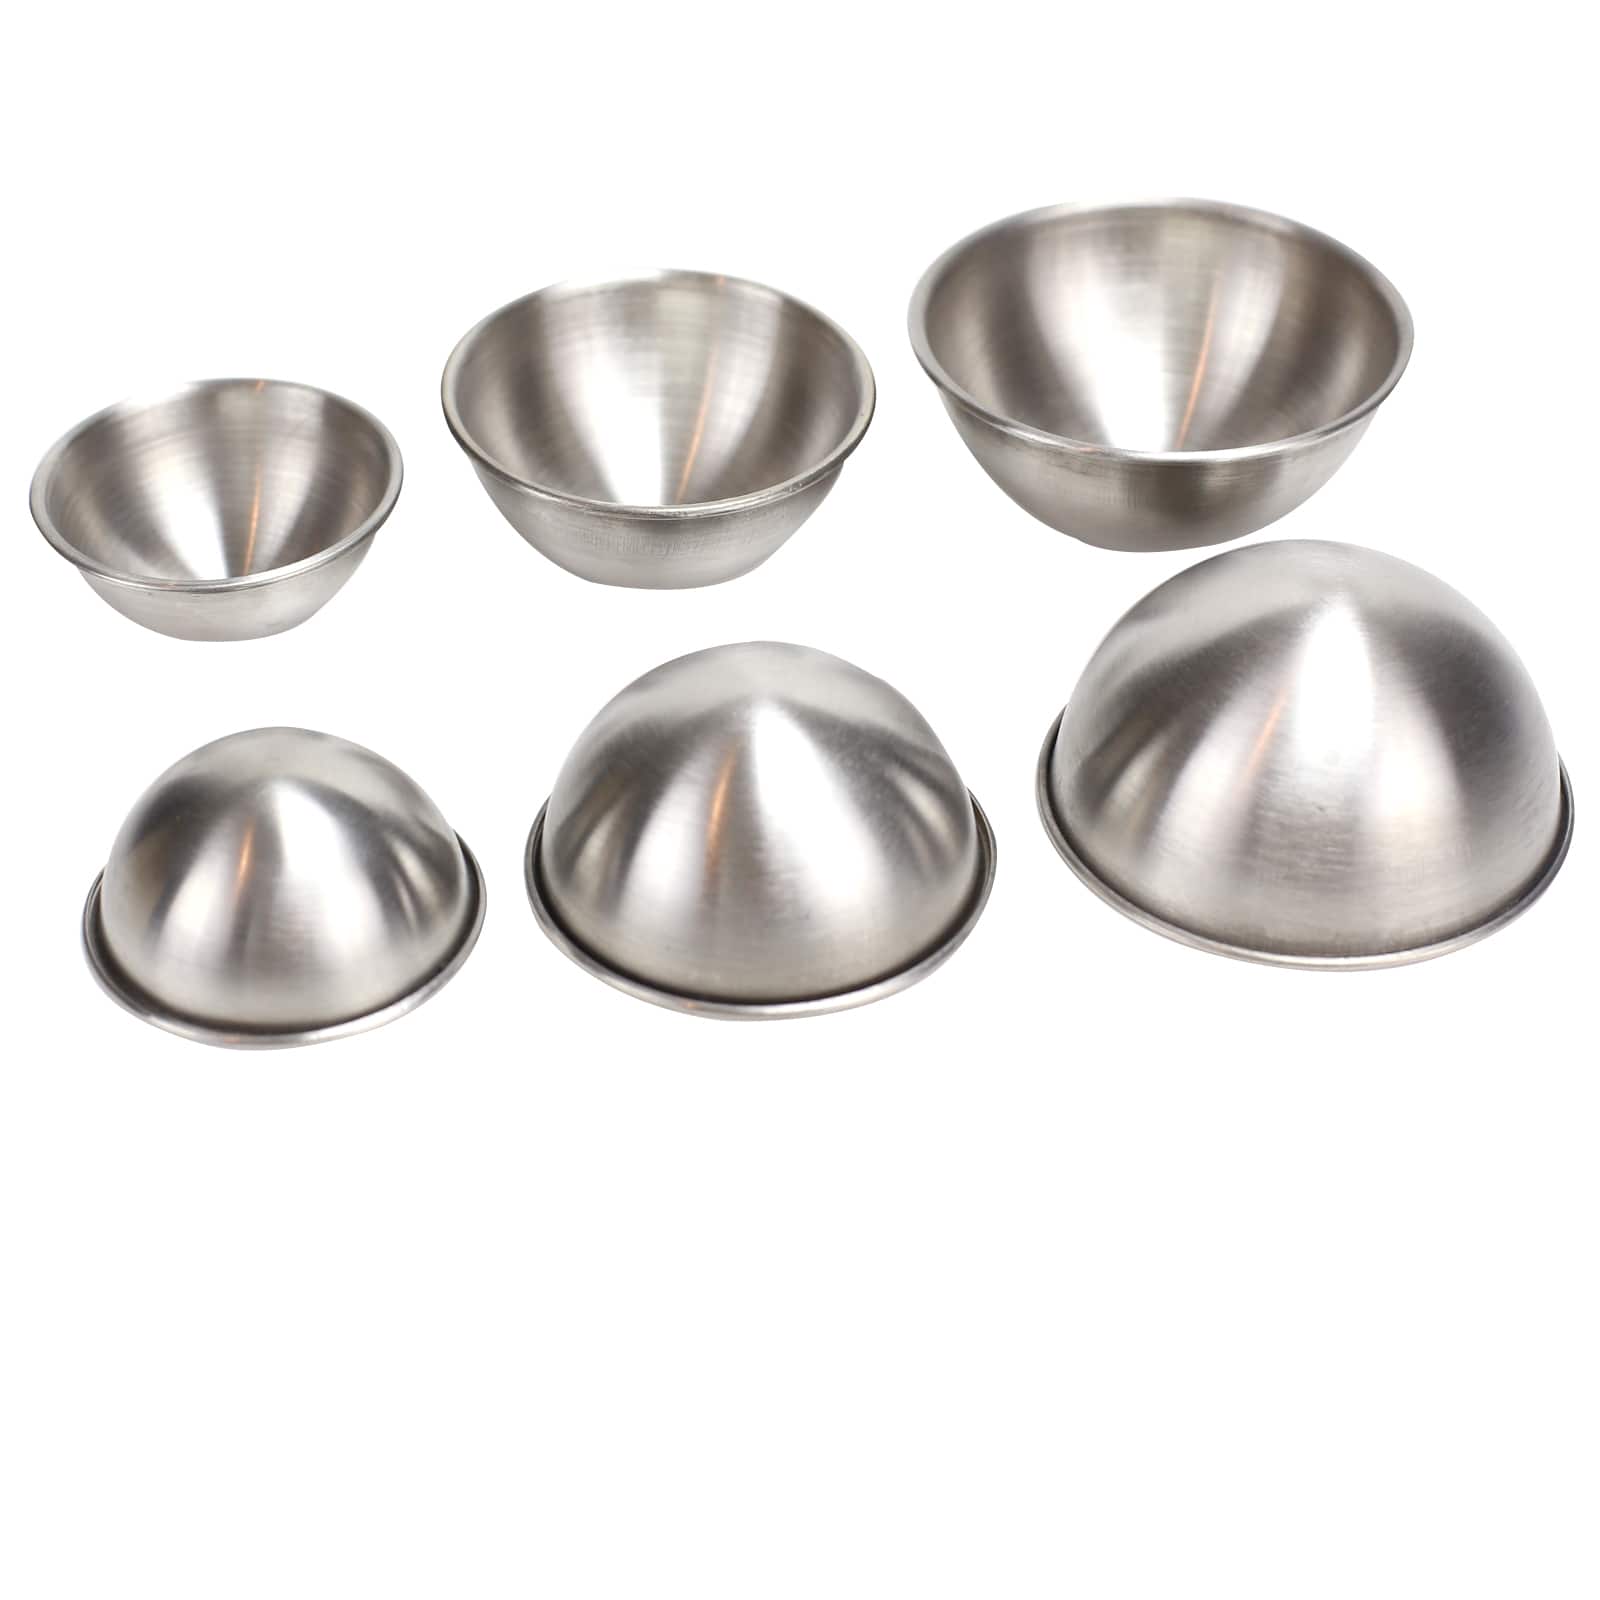 Stainless Steel Bath Bomb Molds by Make Market®